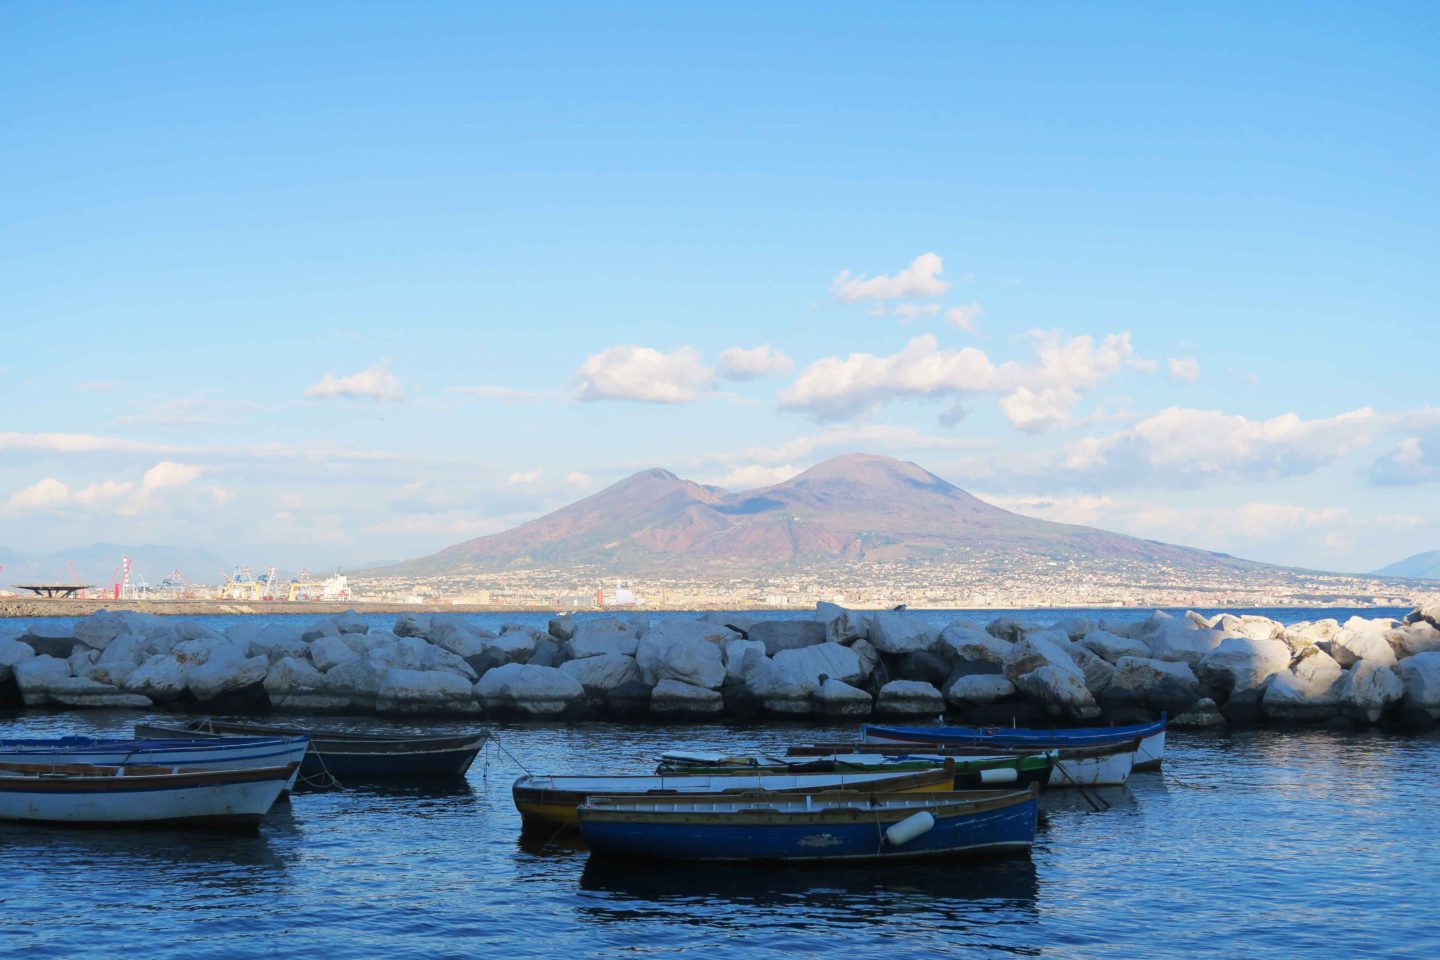 boats in the water at naples in front of mount vesuvius